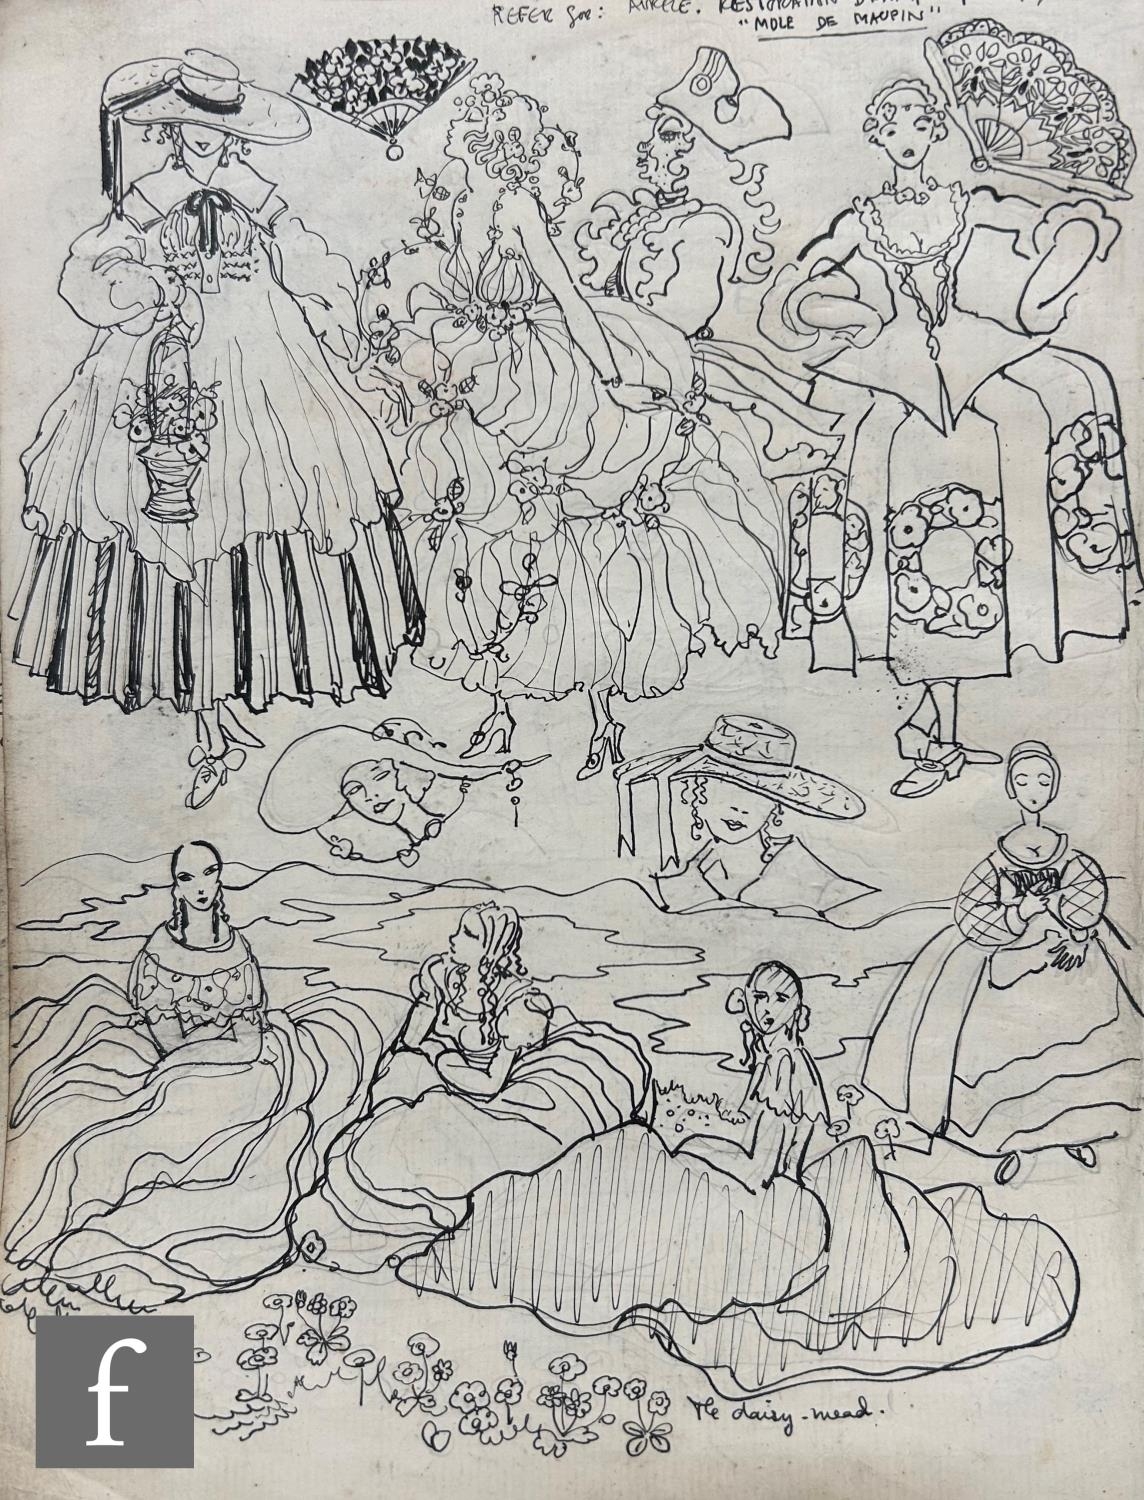 ALBERT WAINWRIGHT (1898-1943) - A sketch depicting multiple figures in period dress, to the - Image 3 of 6